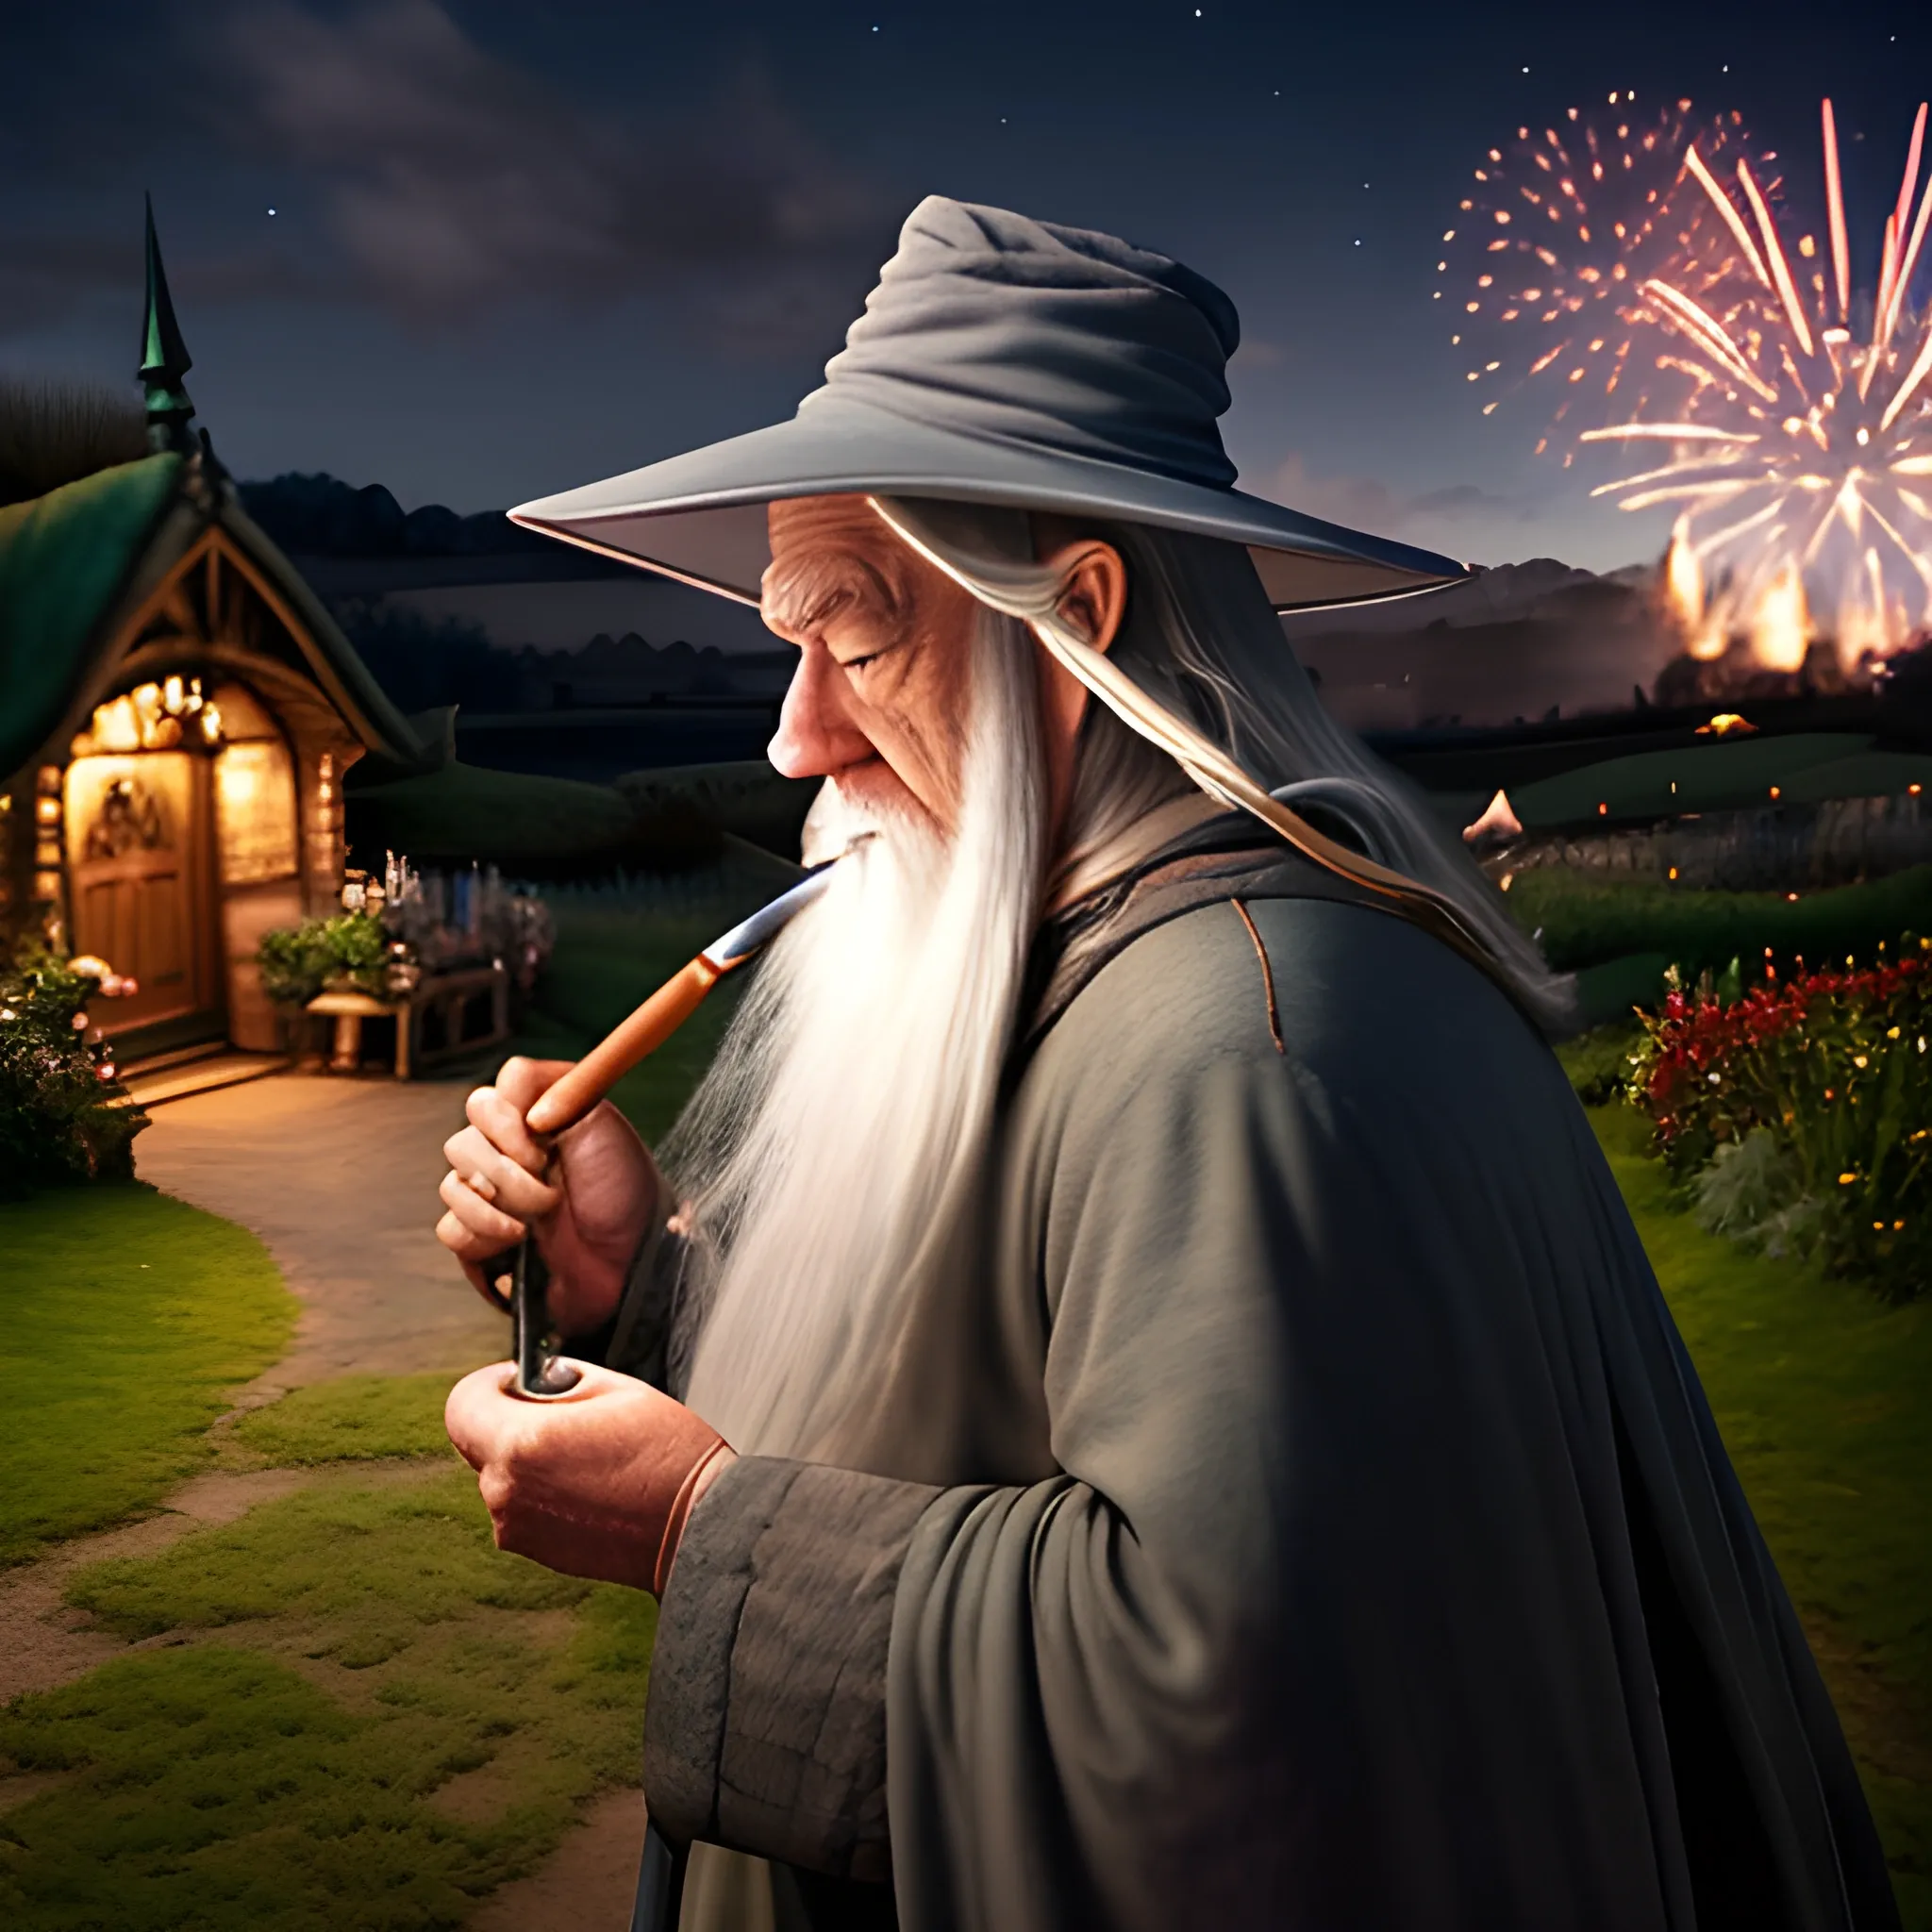 gandalf with his hat on, back to camera, smoking pipe, night scene, hobbiton in background, the shire, warmly lit hobbit holes, party tree, celebration, fireworks